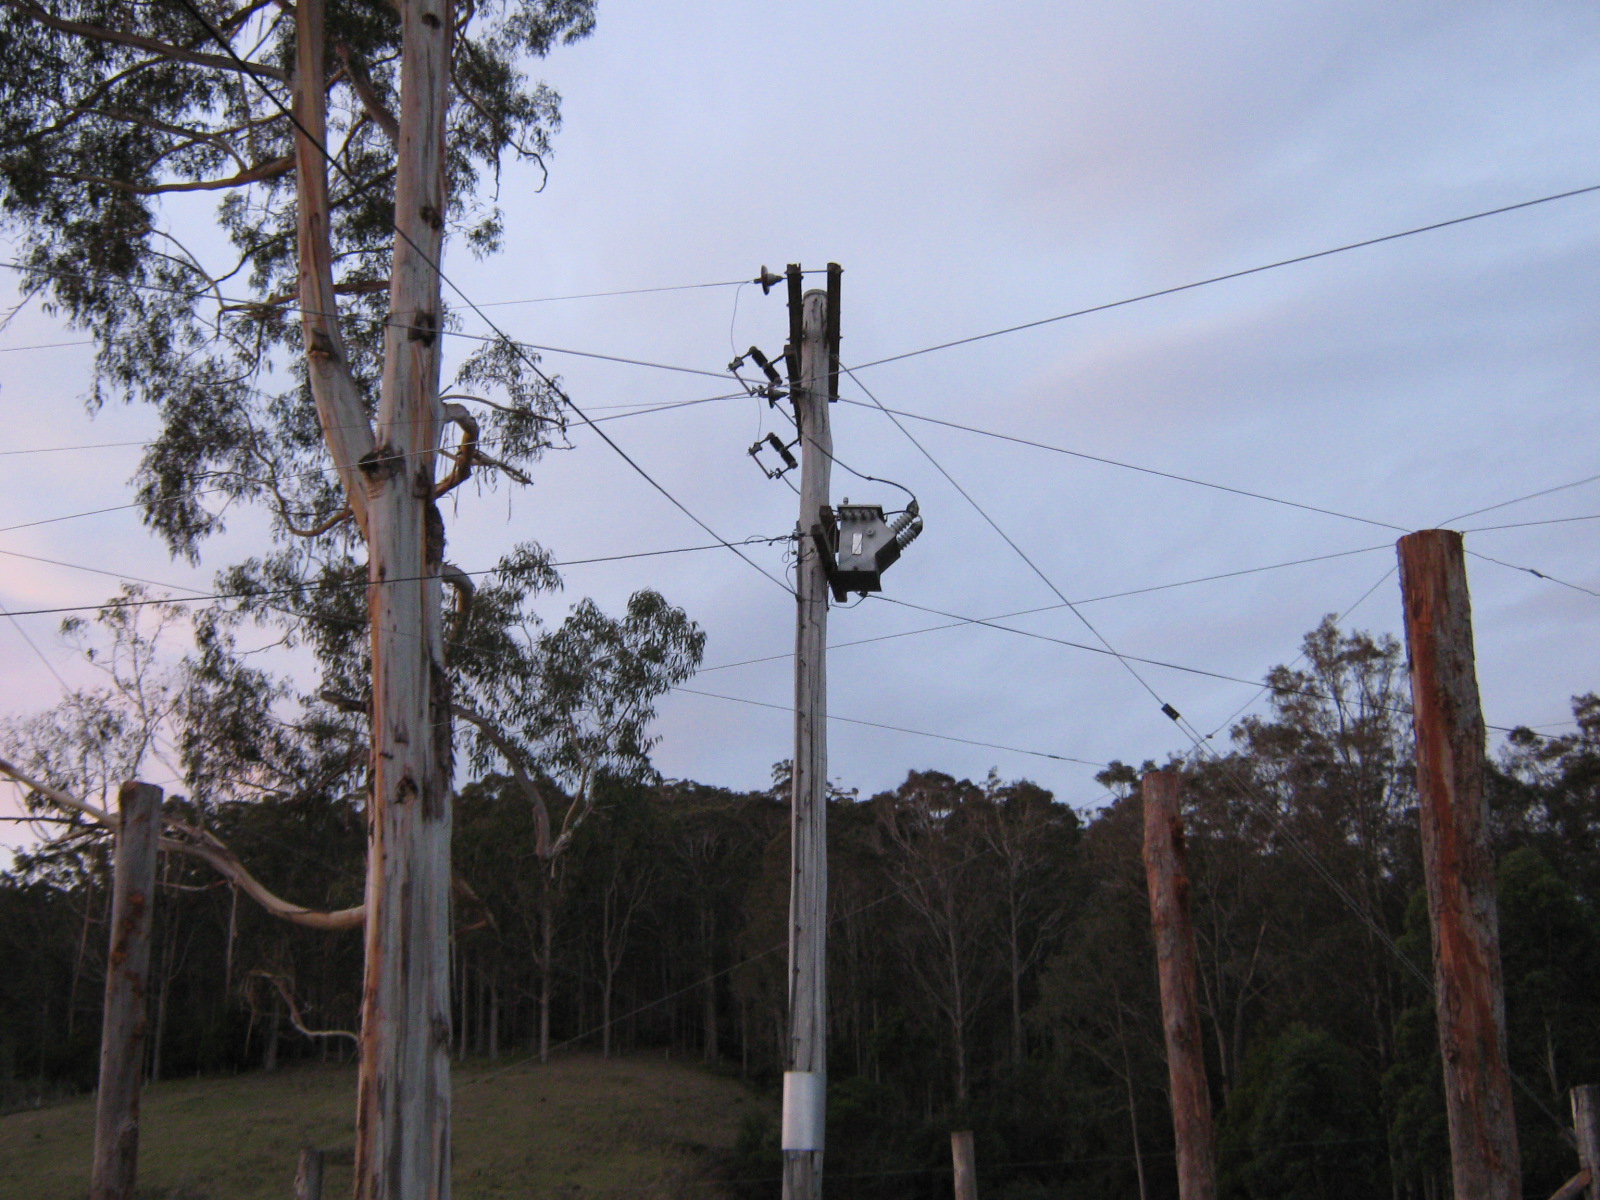 [9.+wired+poles+ready+for+net.JPG]